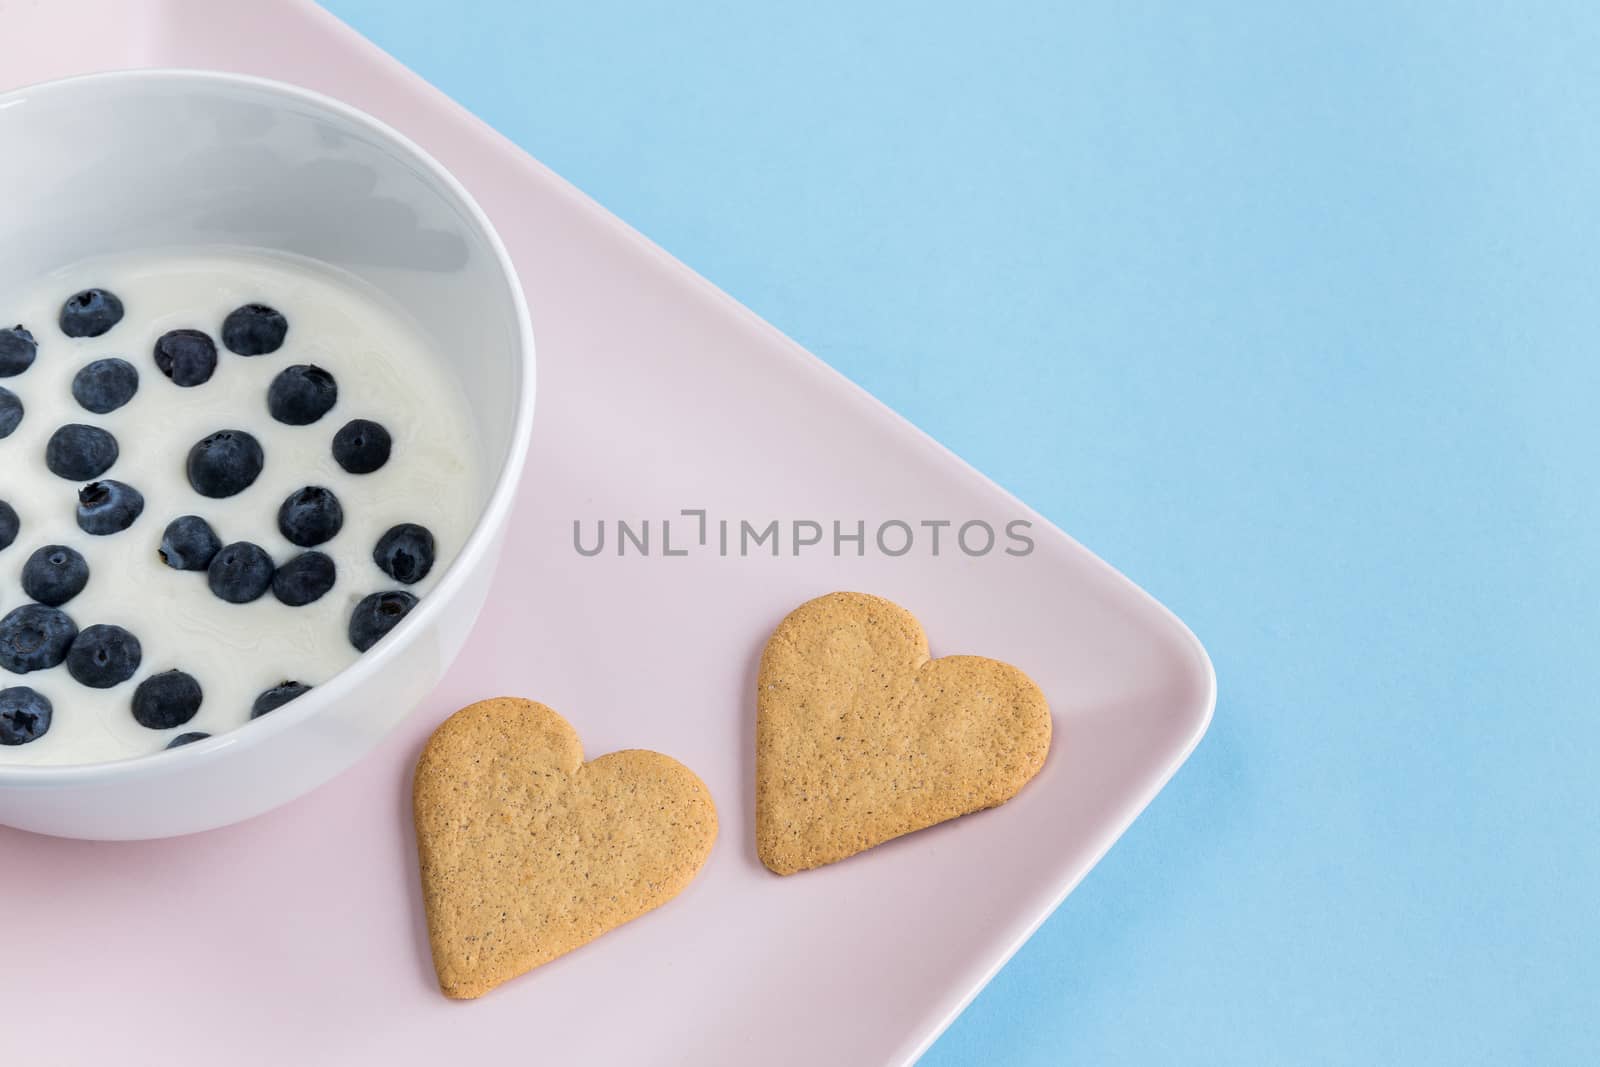 Heart-shaped cookies and a bowl of yogurt with blueberries on a pink tray on a light blue background. Copy space.